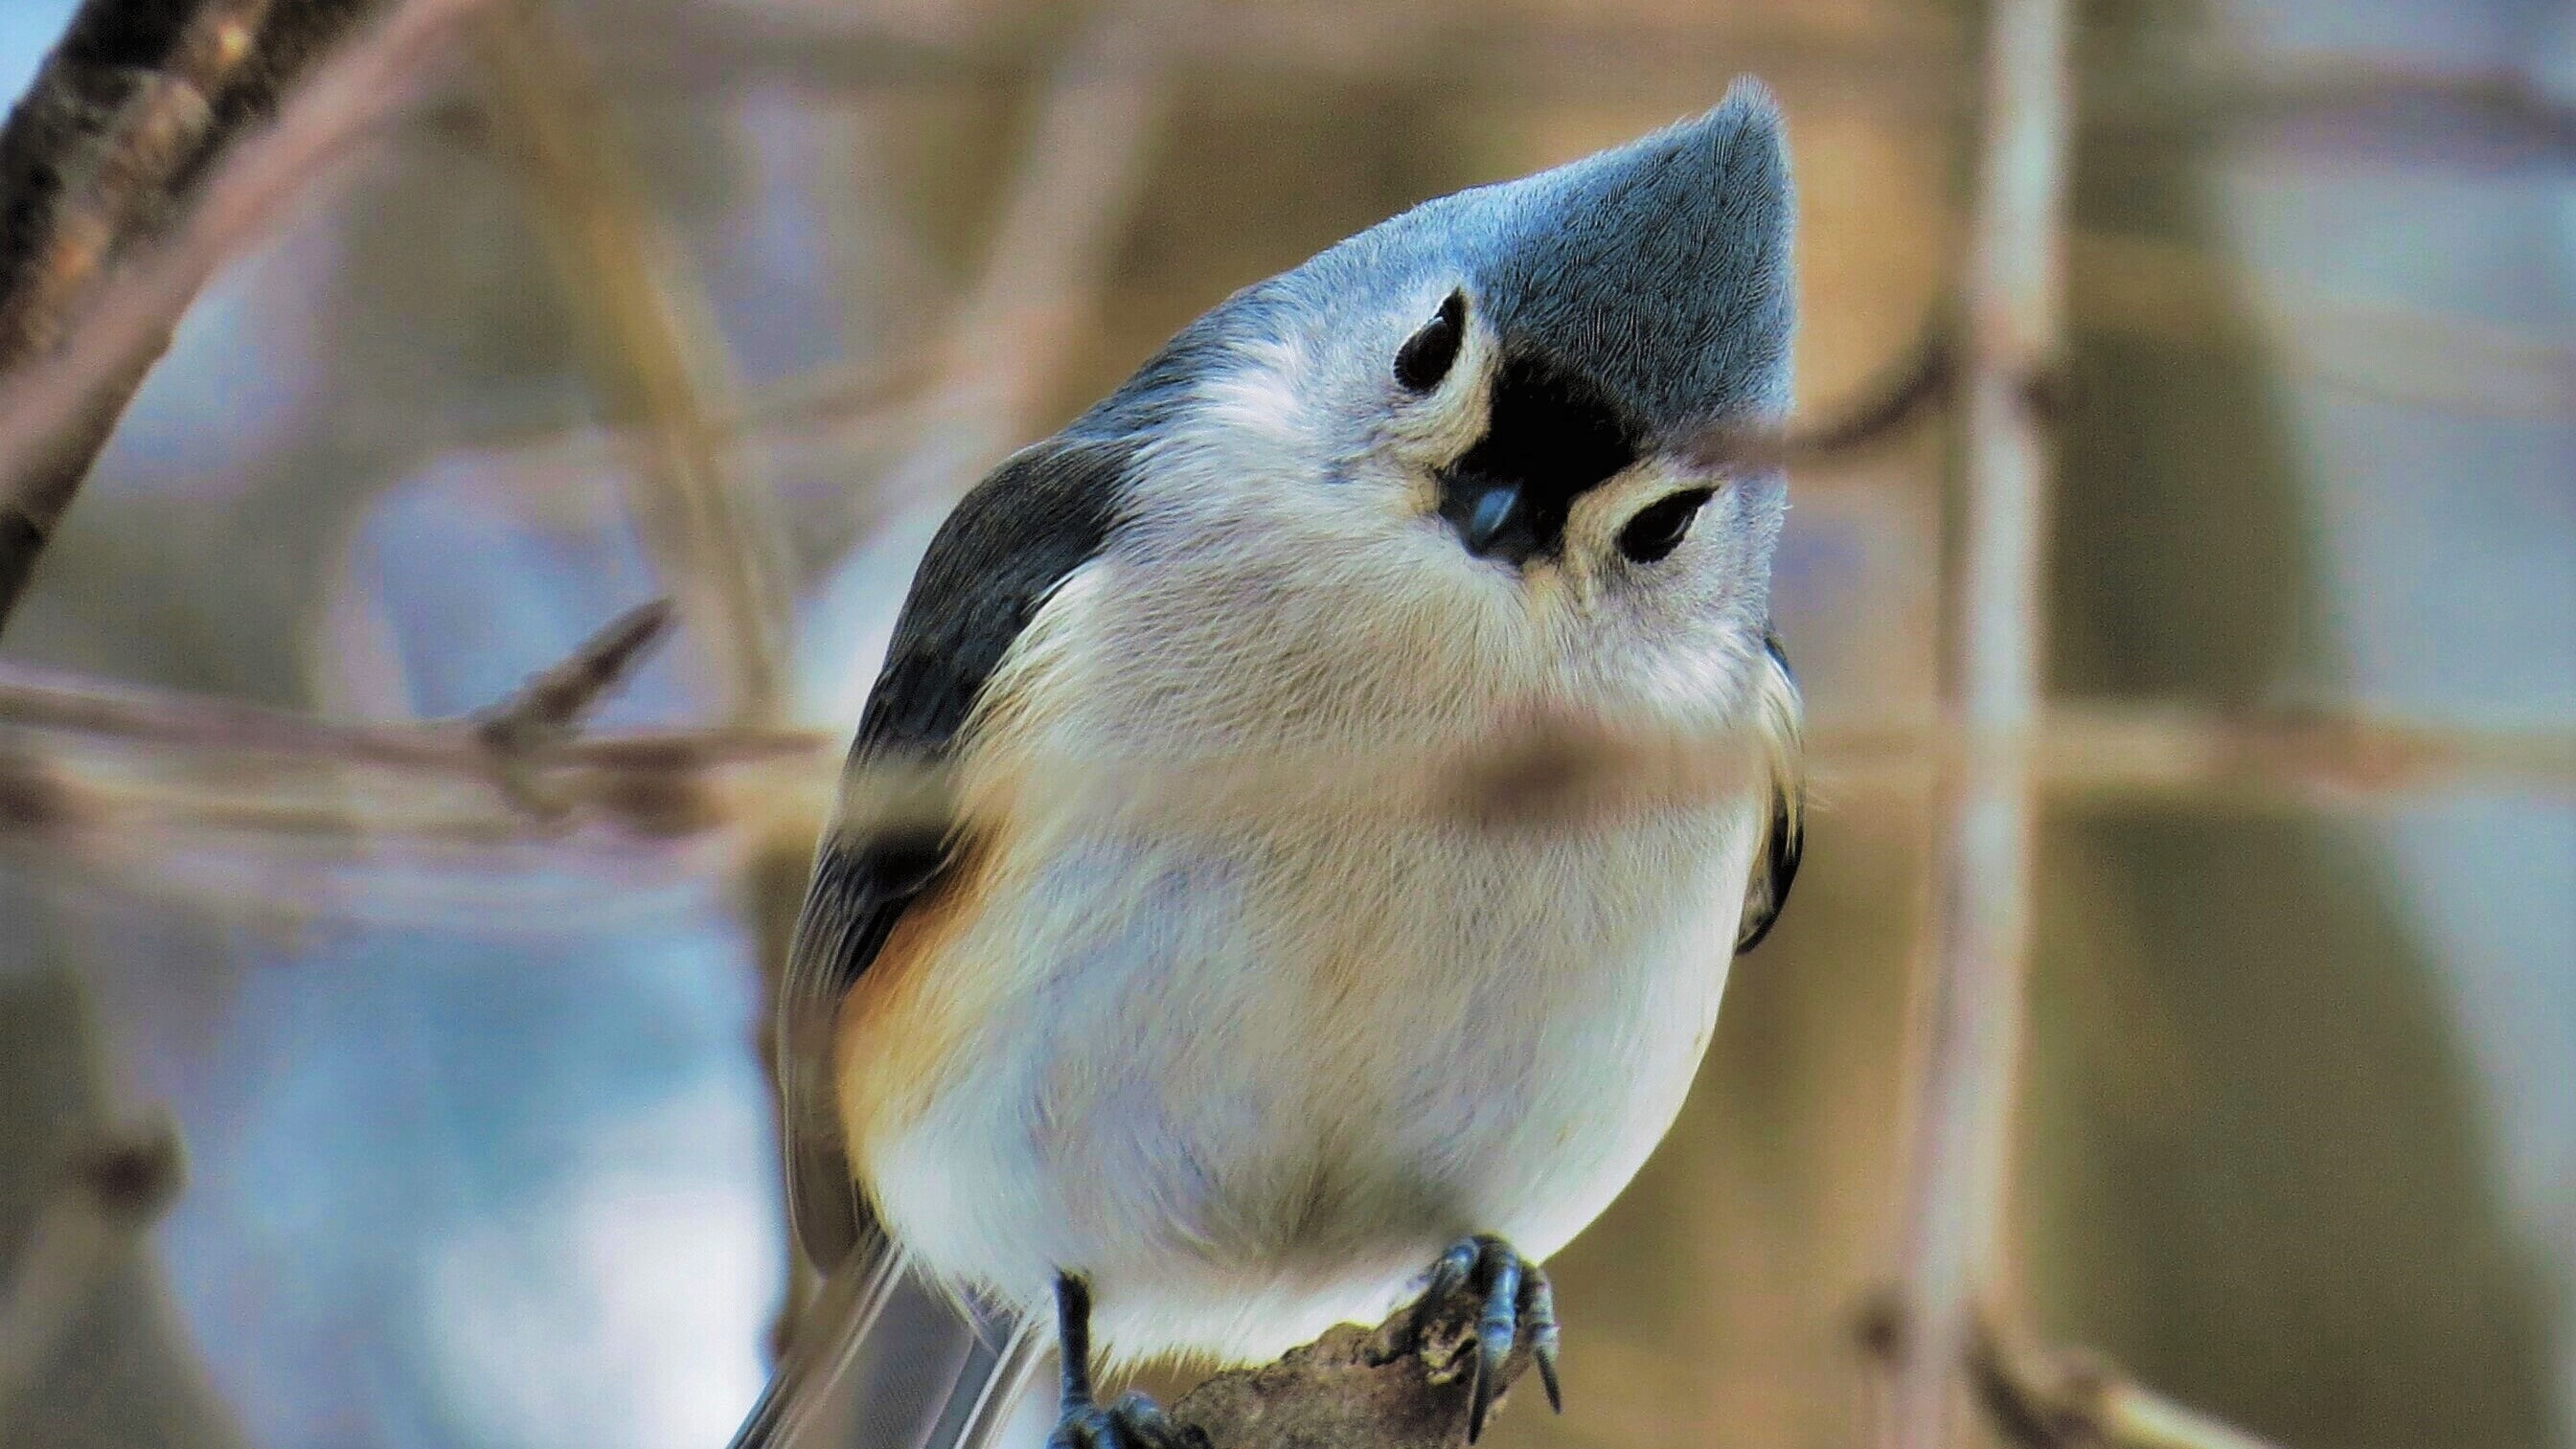 A tufted titmouse on a branch looking at the camera.